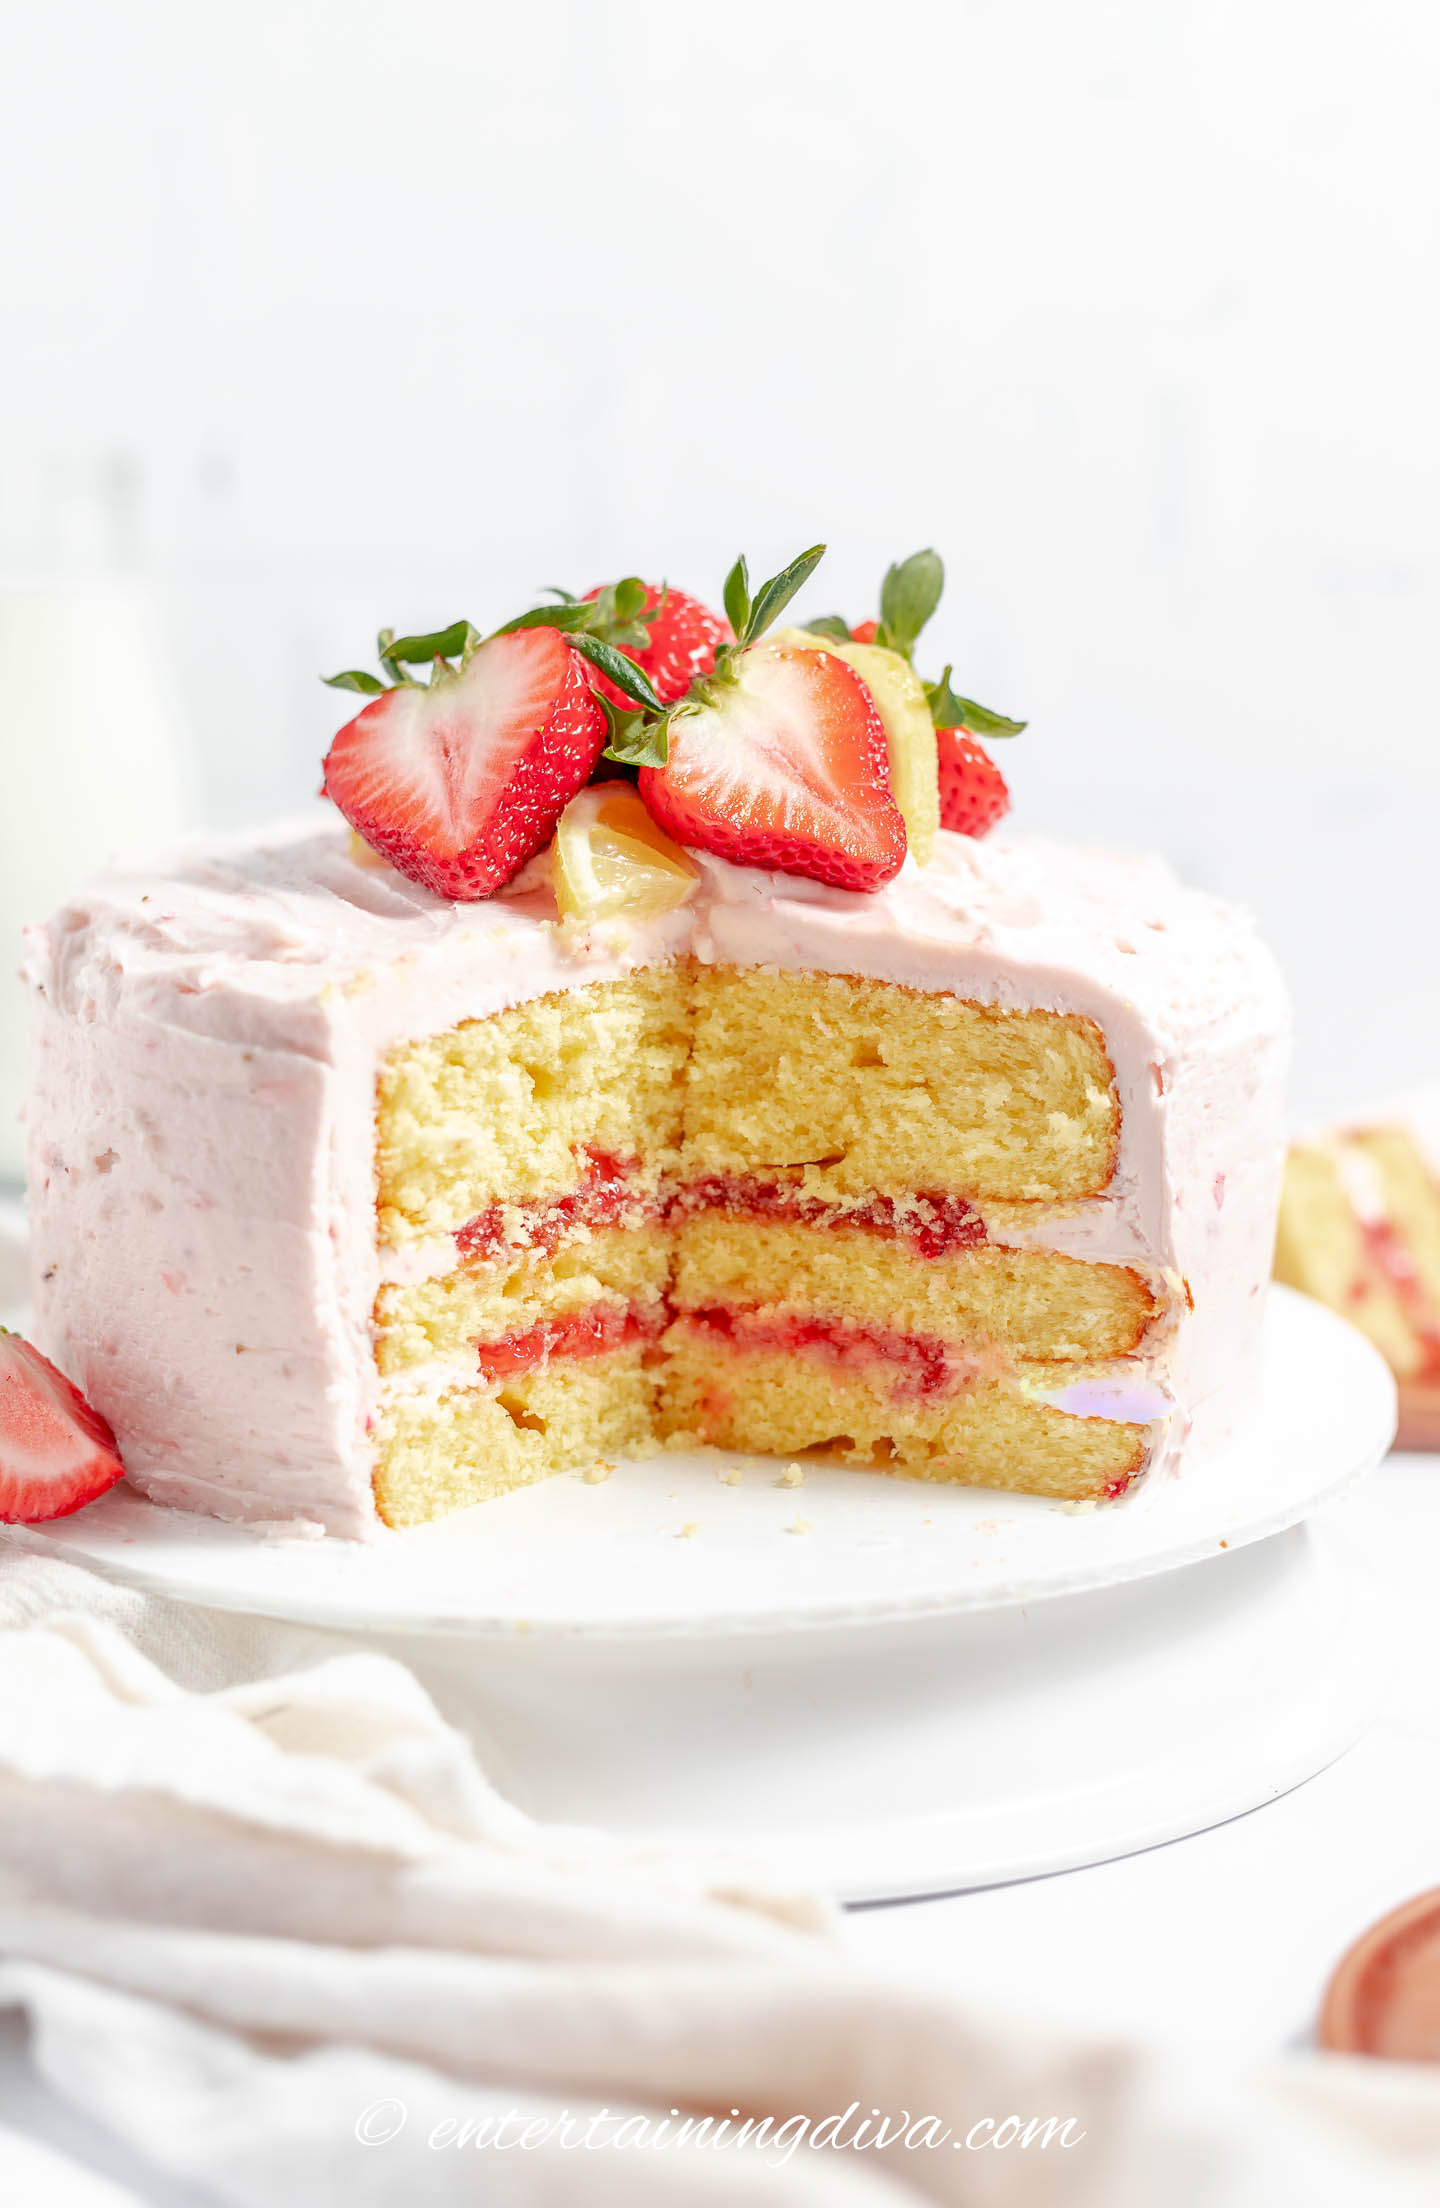 Side view of a strawberry lemon cake with a piece cut out of it